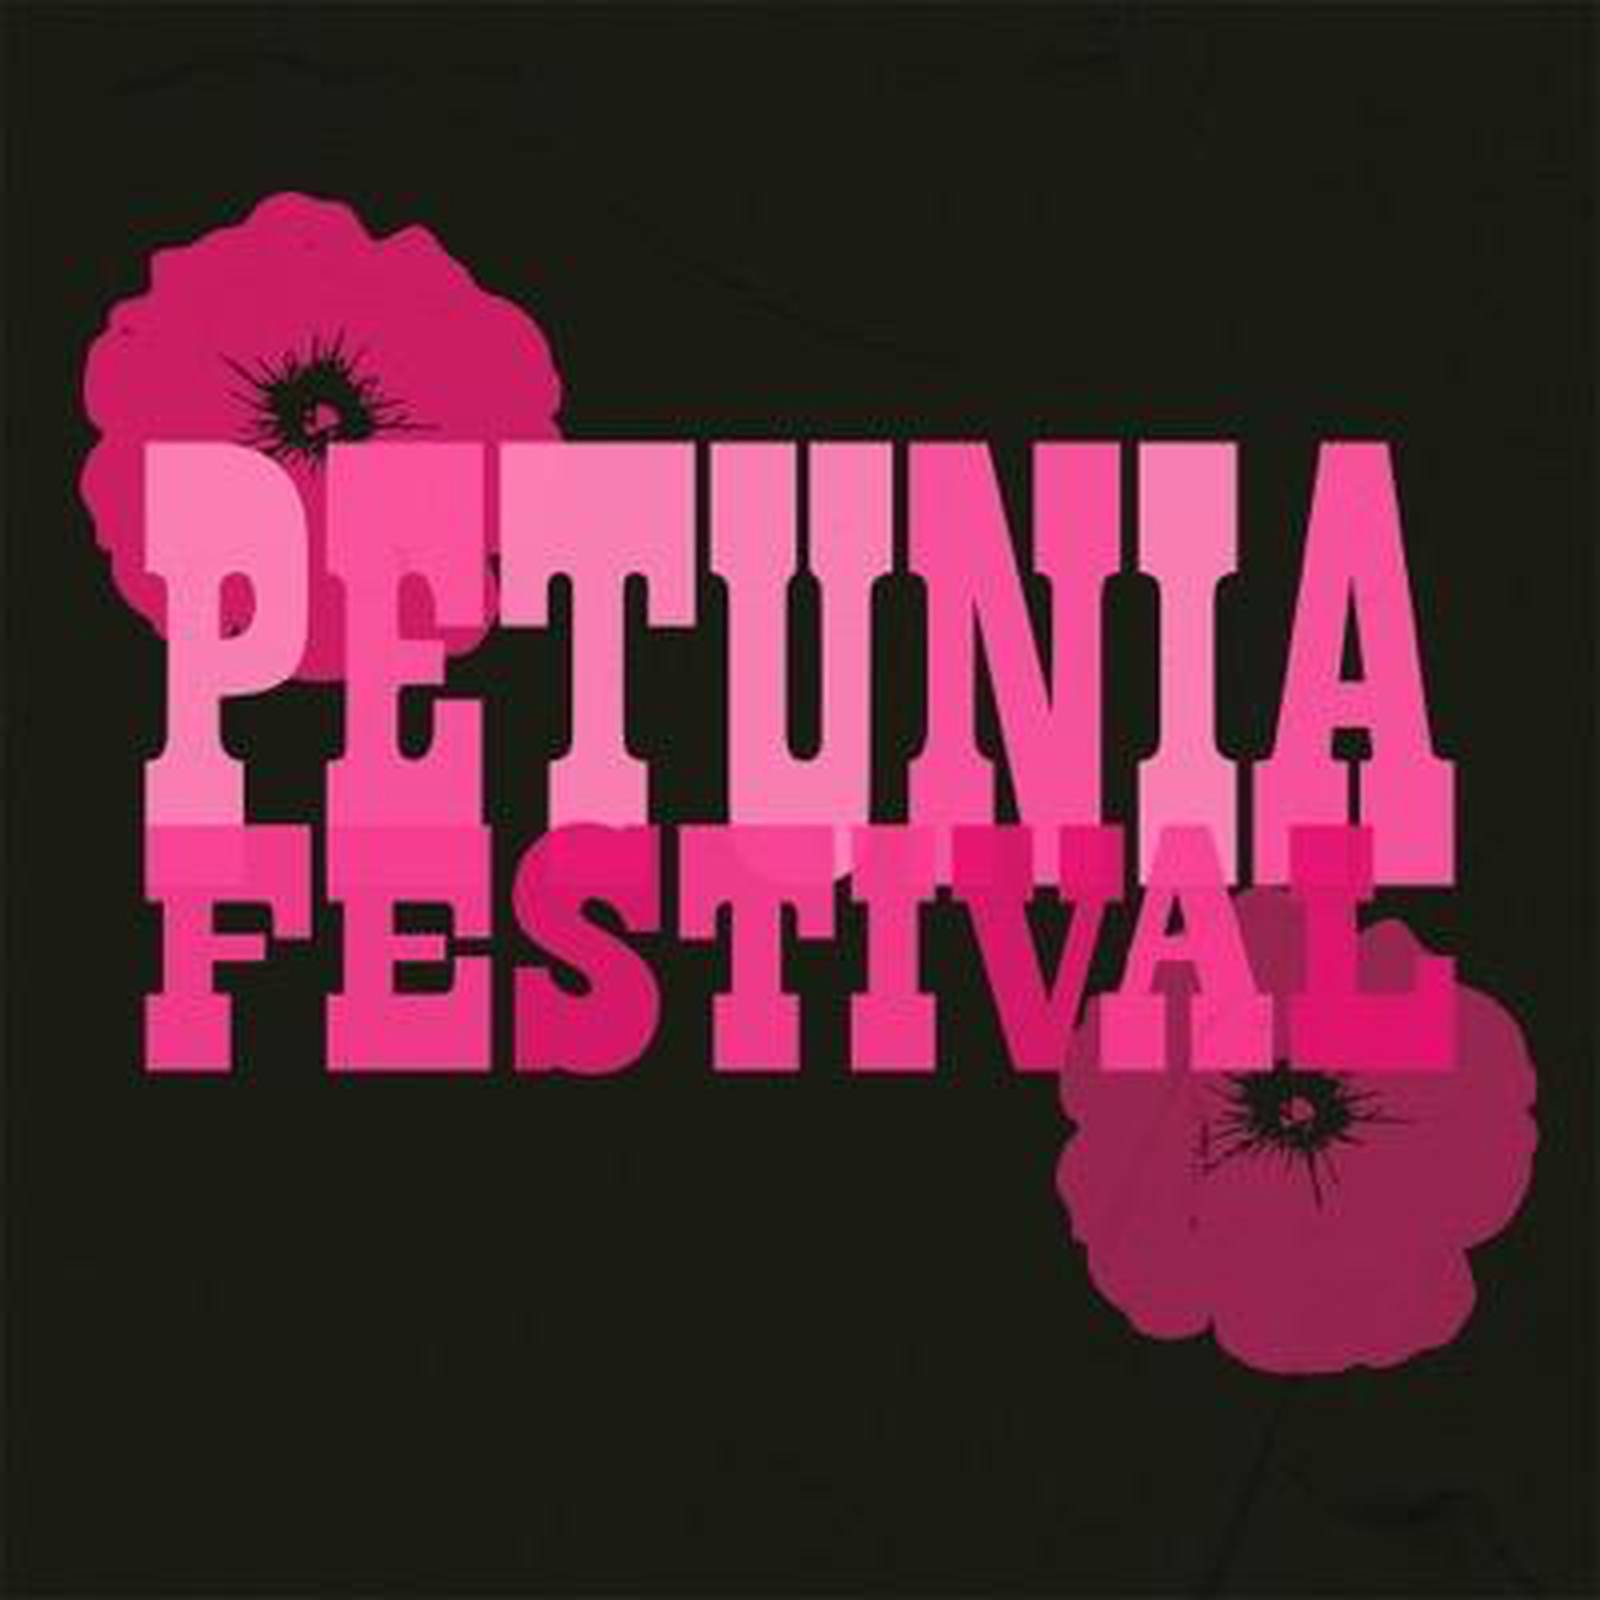 Petunia Festival buttons available for purchase Shaw Local